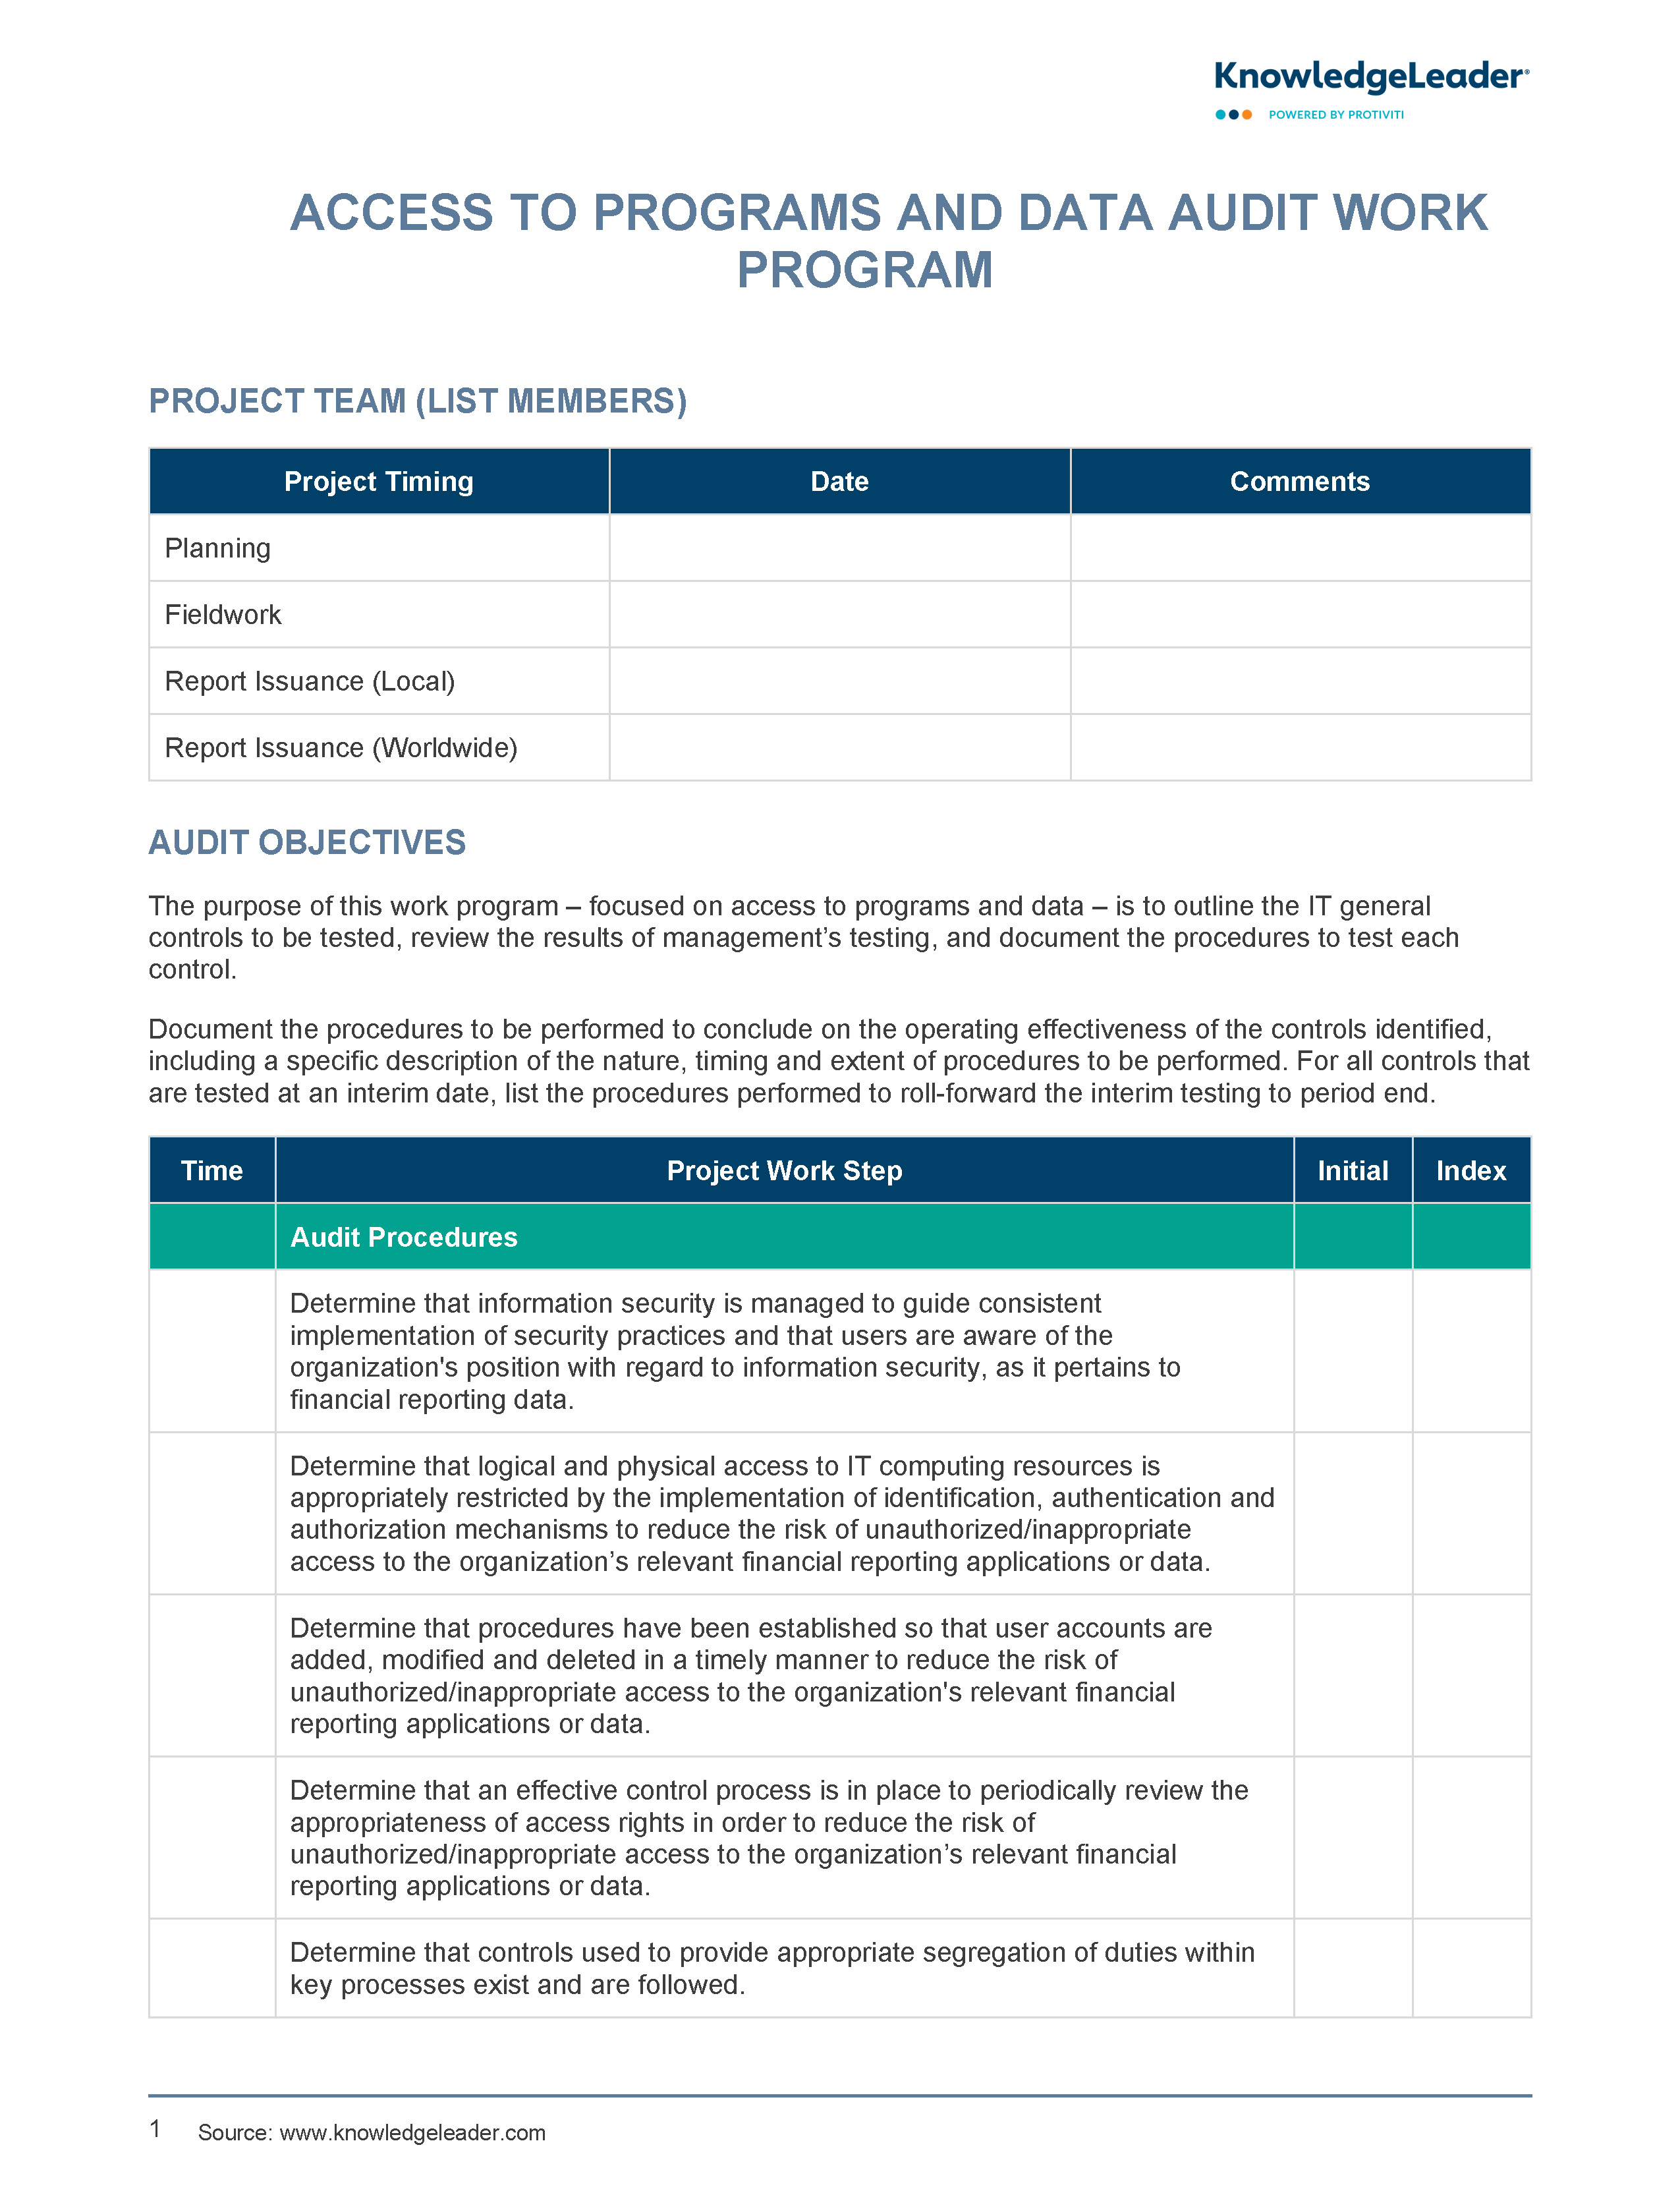 Screenshot of the first page of Access to Programs and Data Audit Work Program